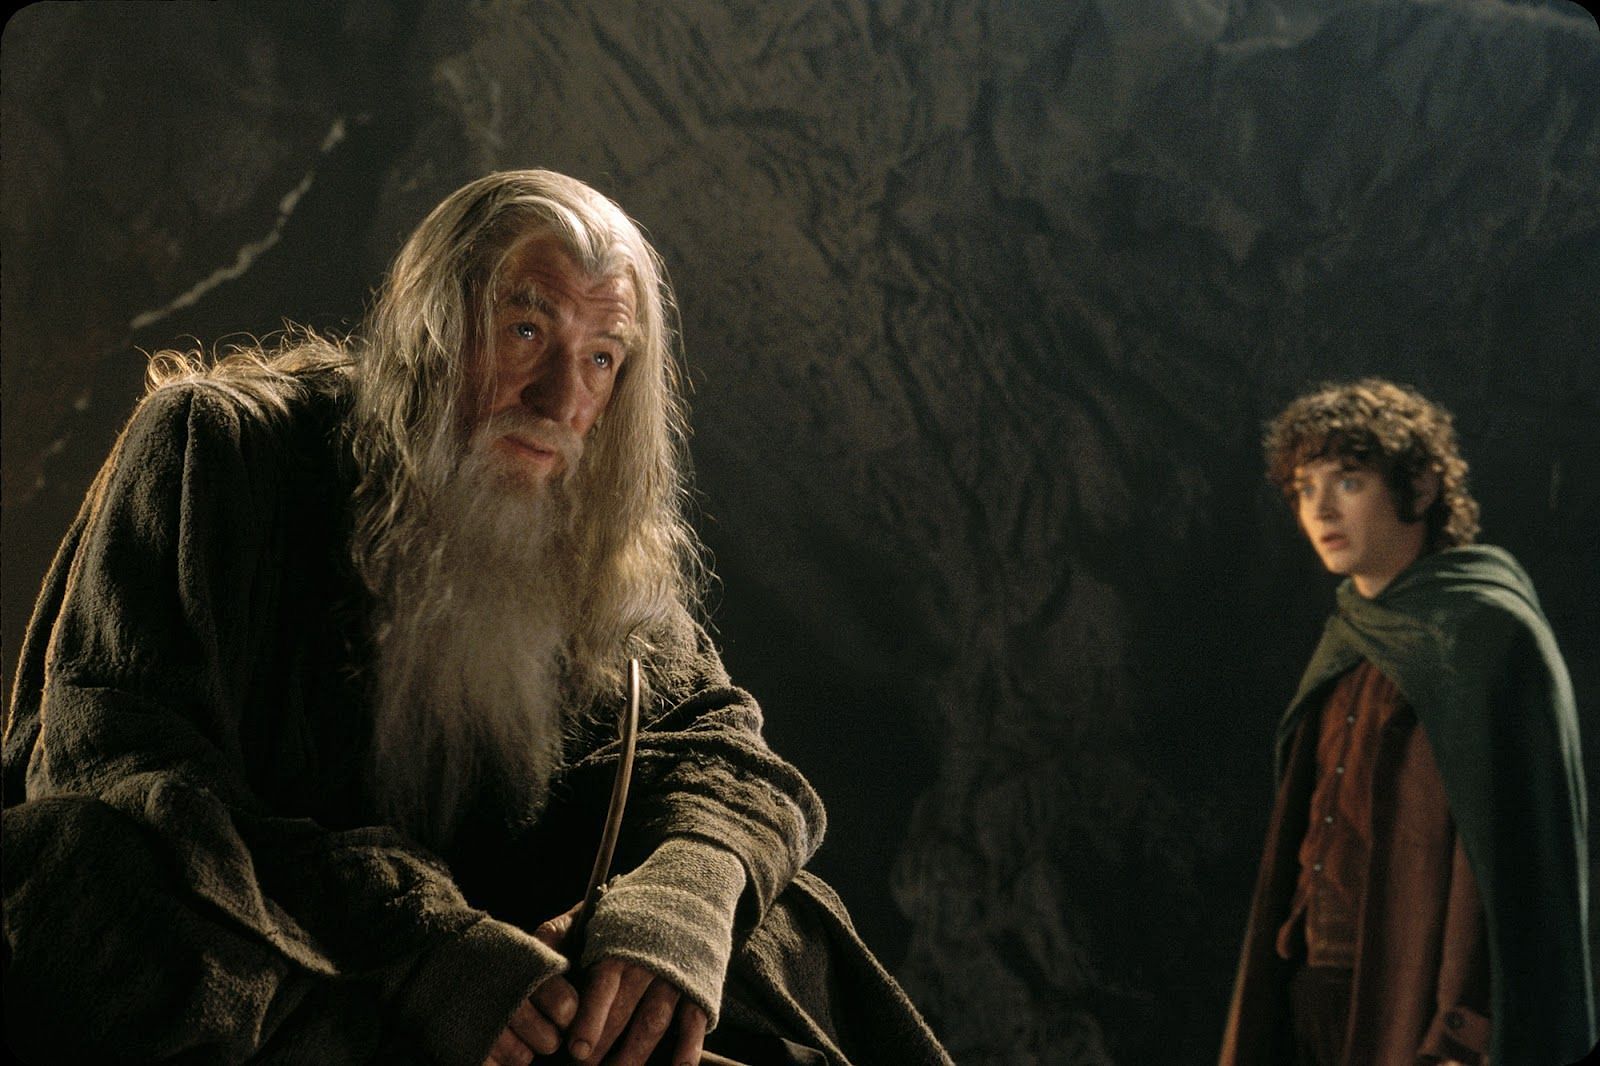 Who played Gandalf in The Lord of the Rings?